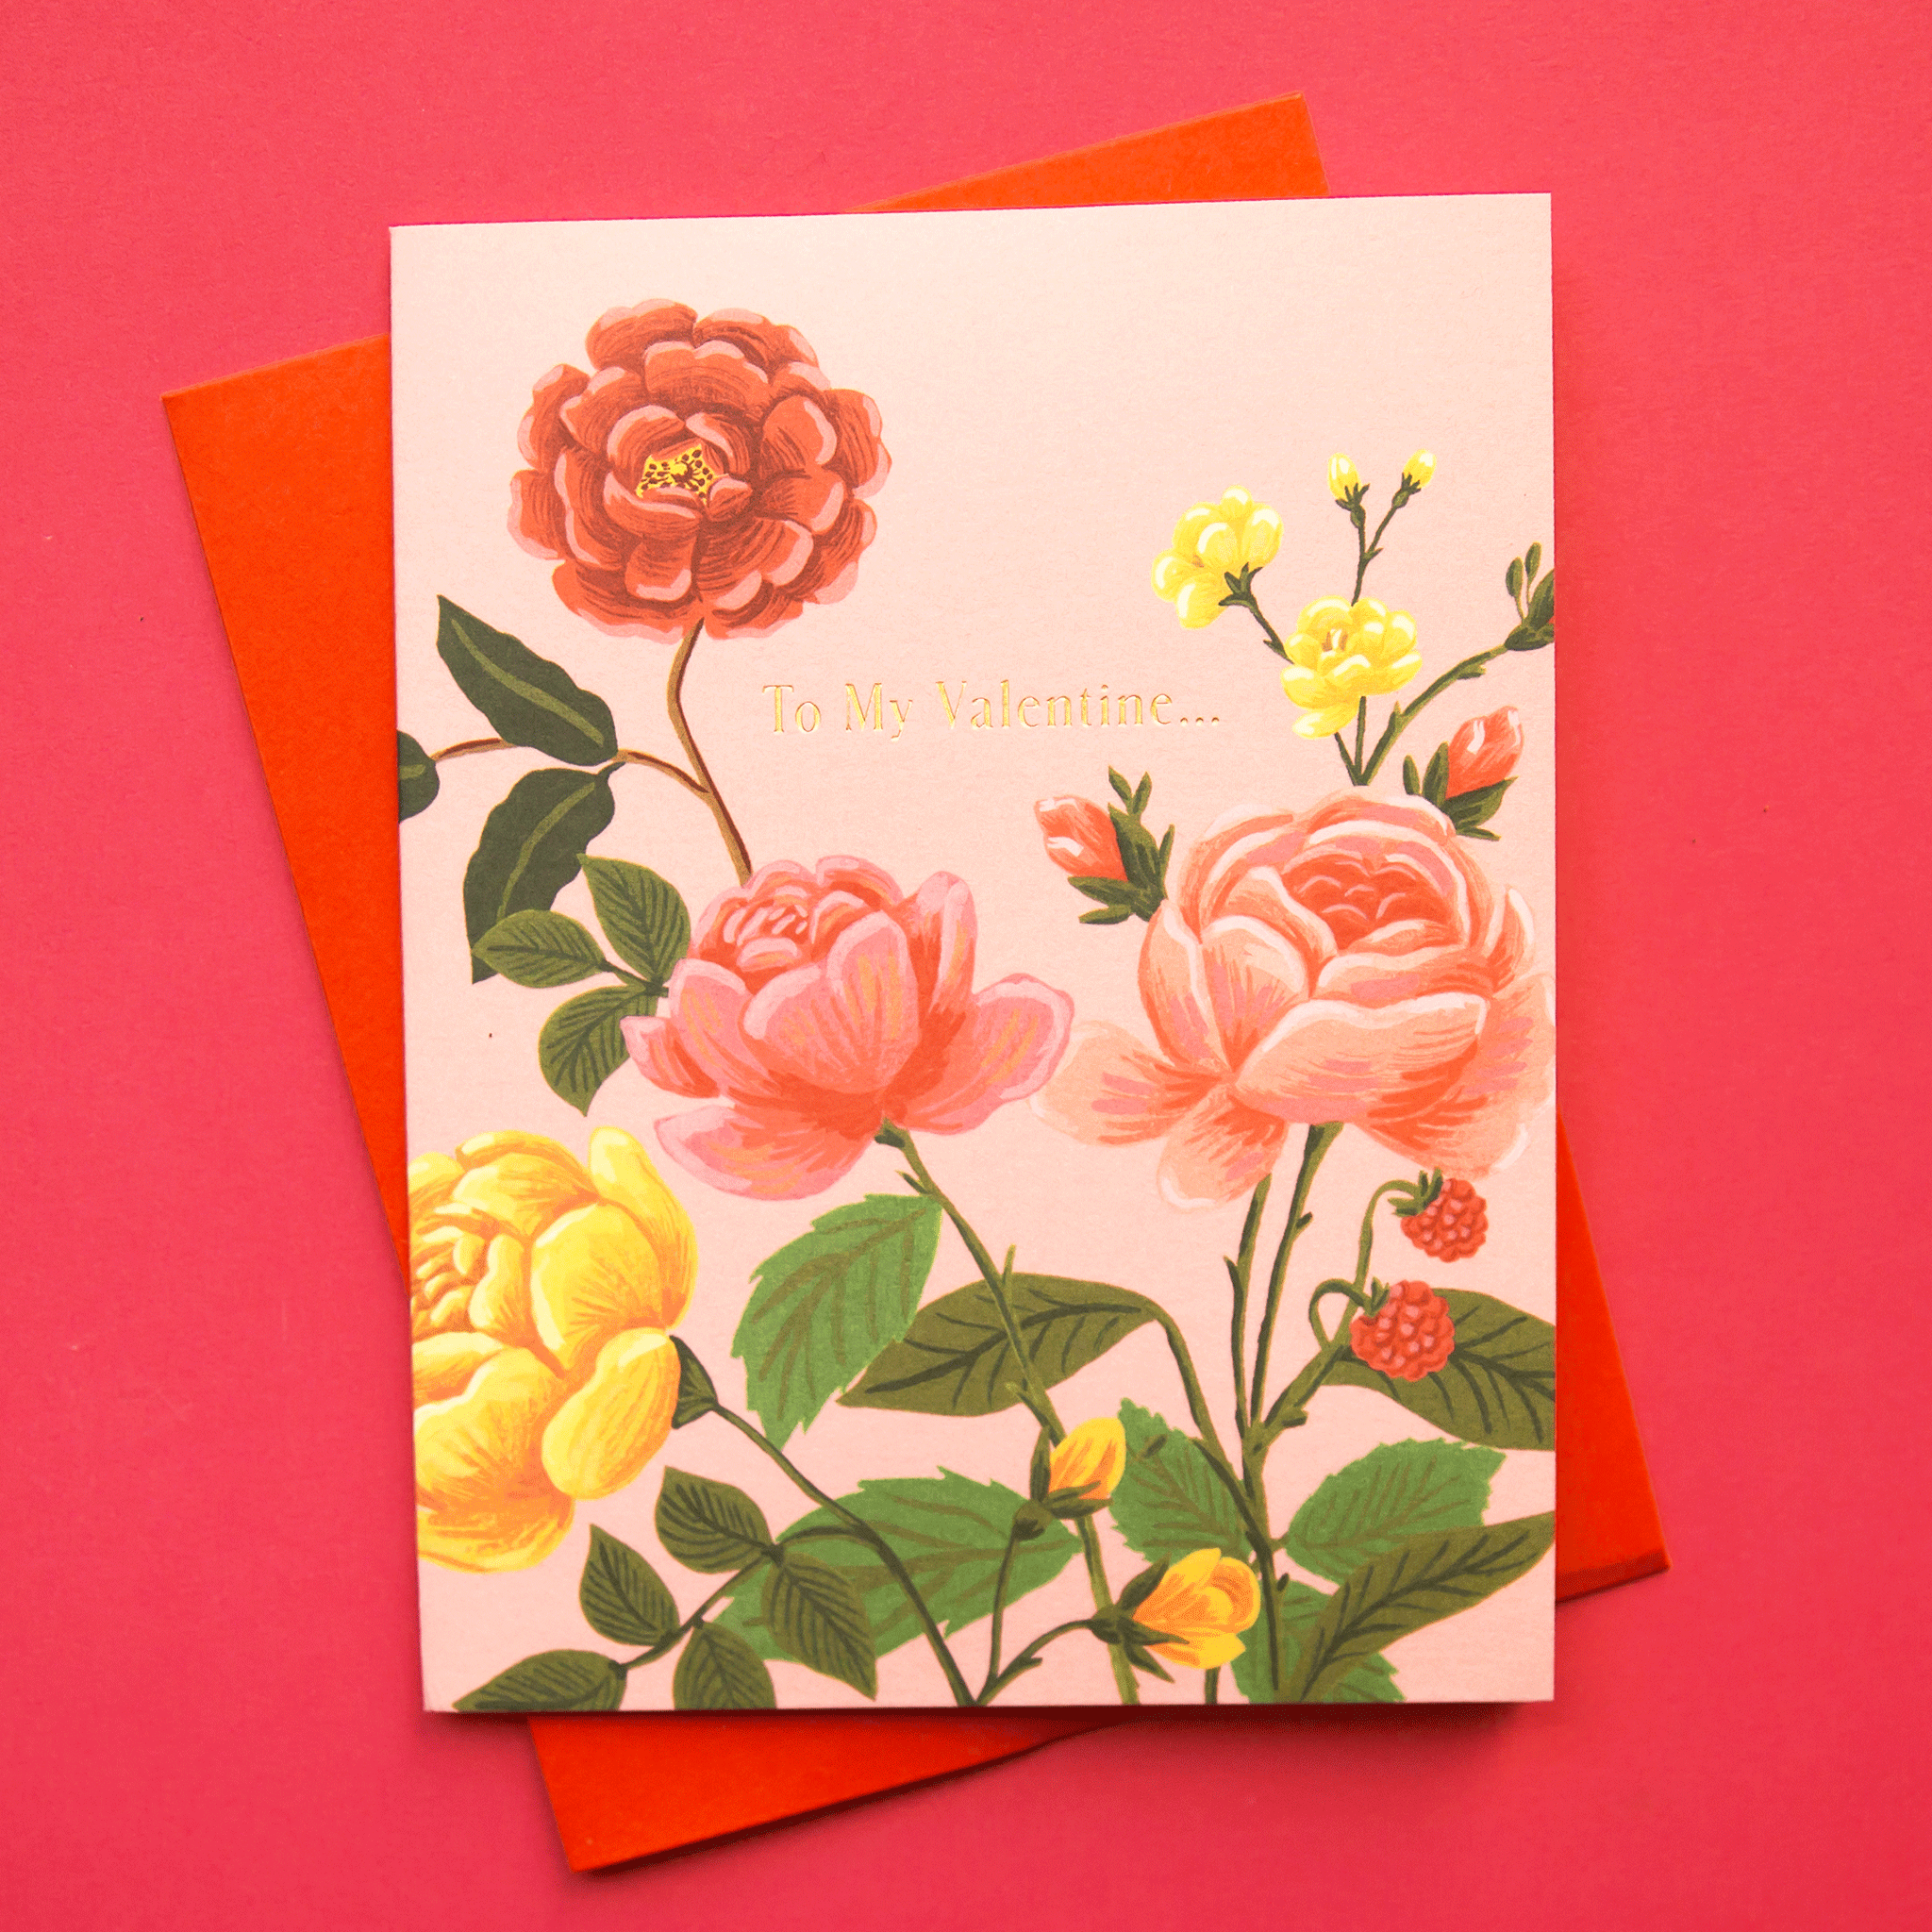 On a red background is a pink card with a floral print and text that reads, "To My Valentine..." as well as a coordinating red envelope.